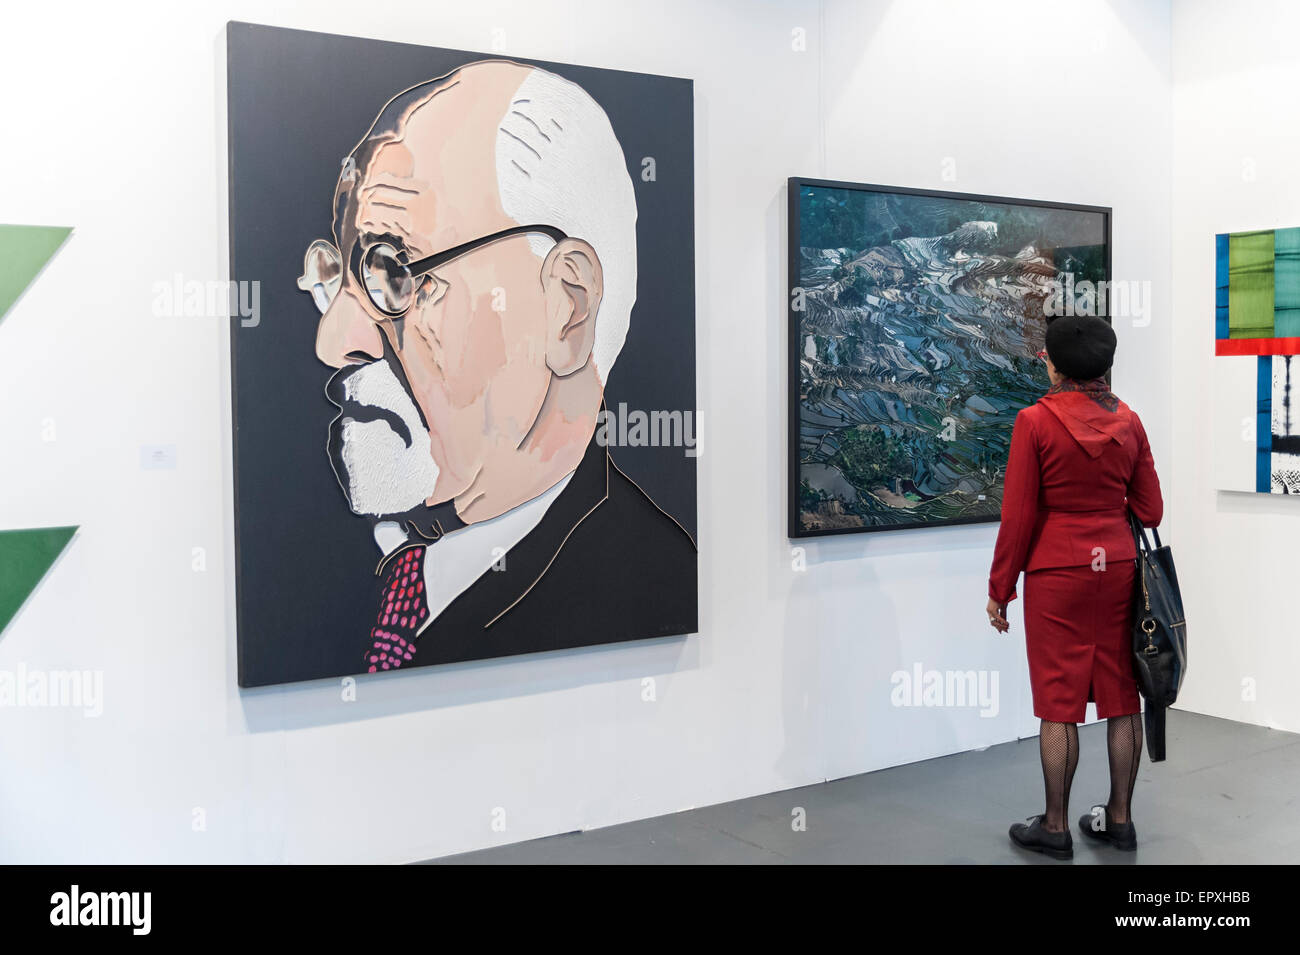 London, UK. 22 May 2015. A visitor looks at 'S. Freud' by Lee Waisler at Art15, a global art fair currently taking place at Kensington Olympia.  Work from artists from over 40 countries is showcased - from emerging artists to modern masters. Credit:  Stephen Chung / Alamy Live News Stock Photo